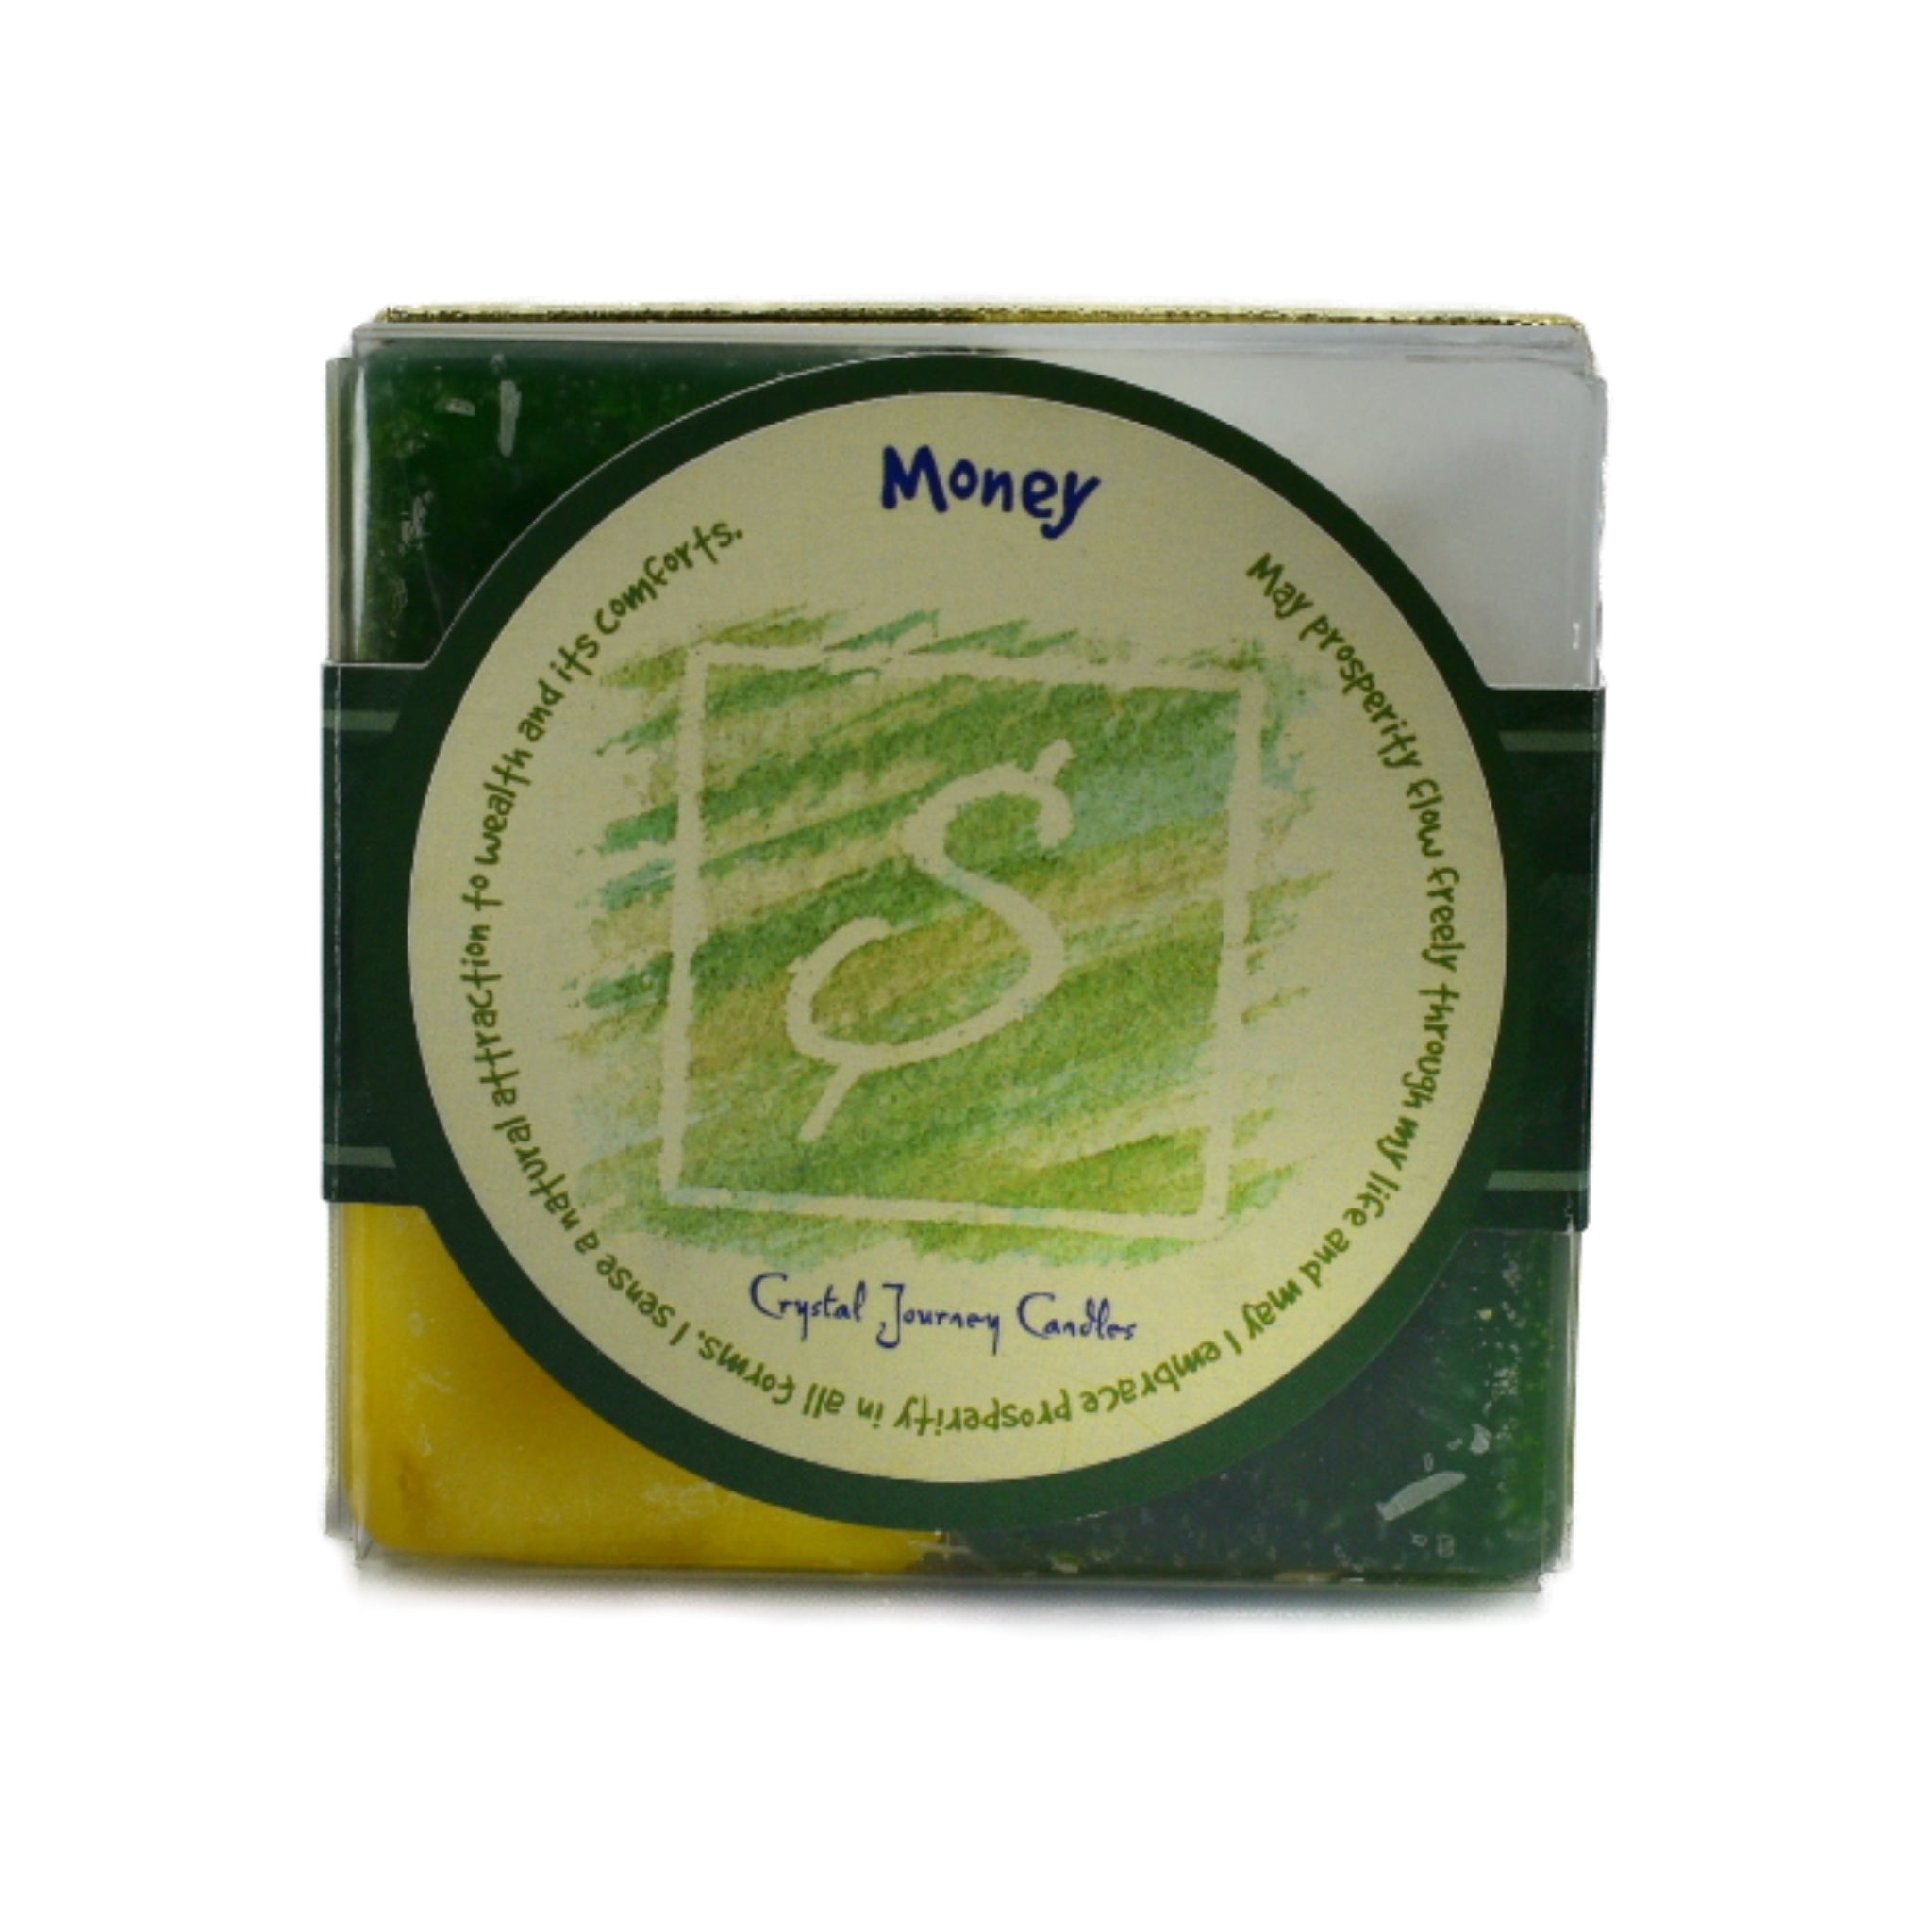 Money Square Pack Candle.  This package has two green money candles, one white spirit candle and one yellow positive energy candle.  Light these candles to embrace prosperity in any form.  